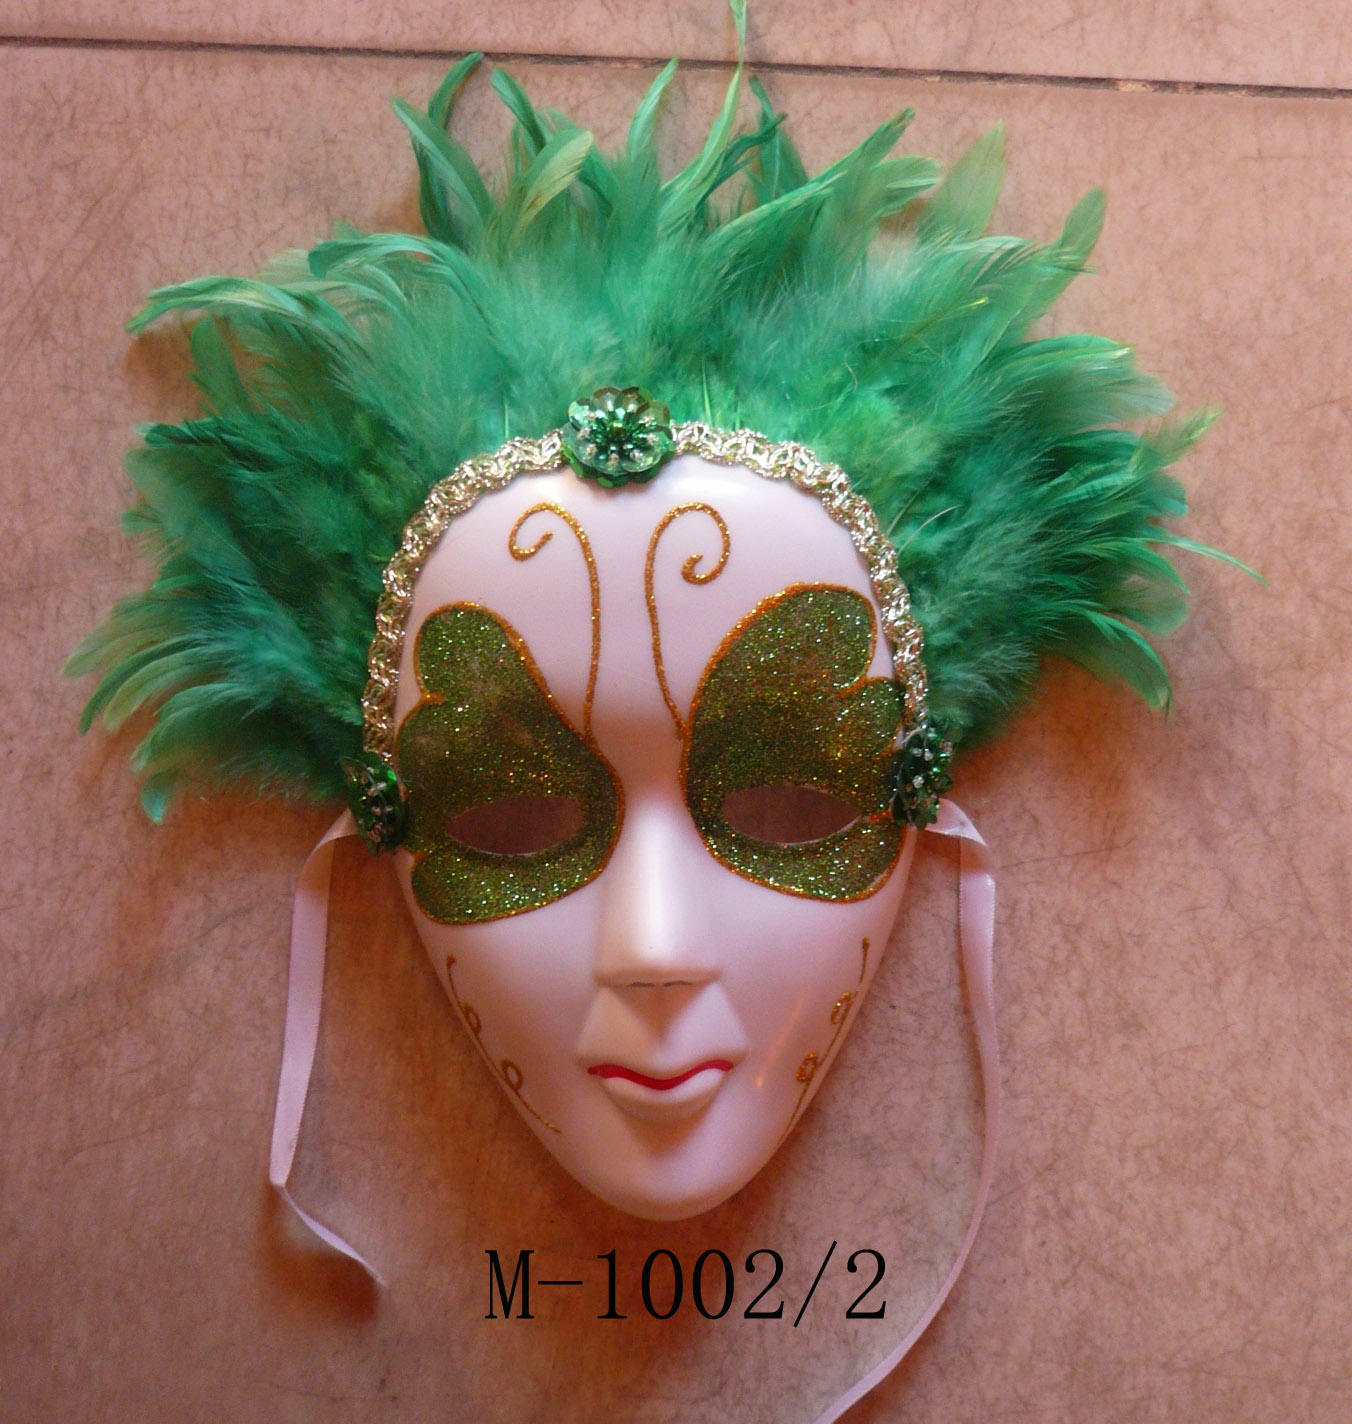 Cheap feather masks for sale - Made in China M-1002／2